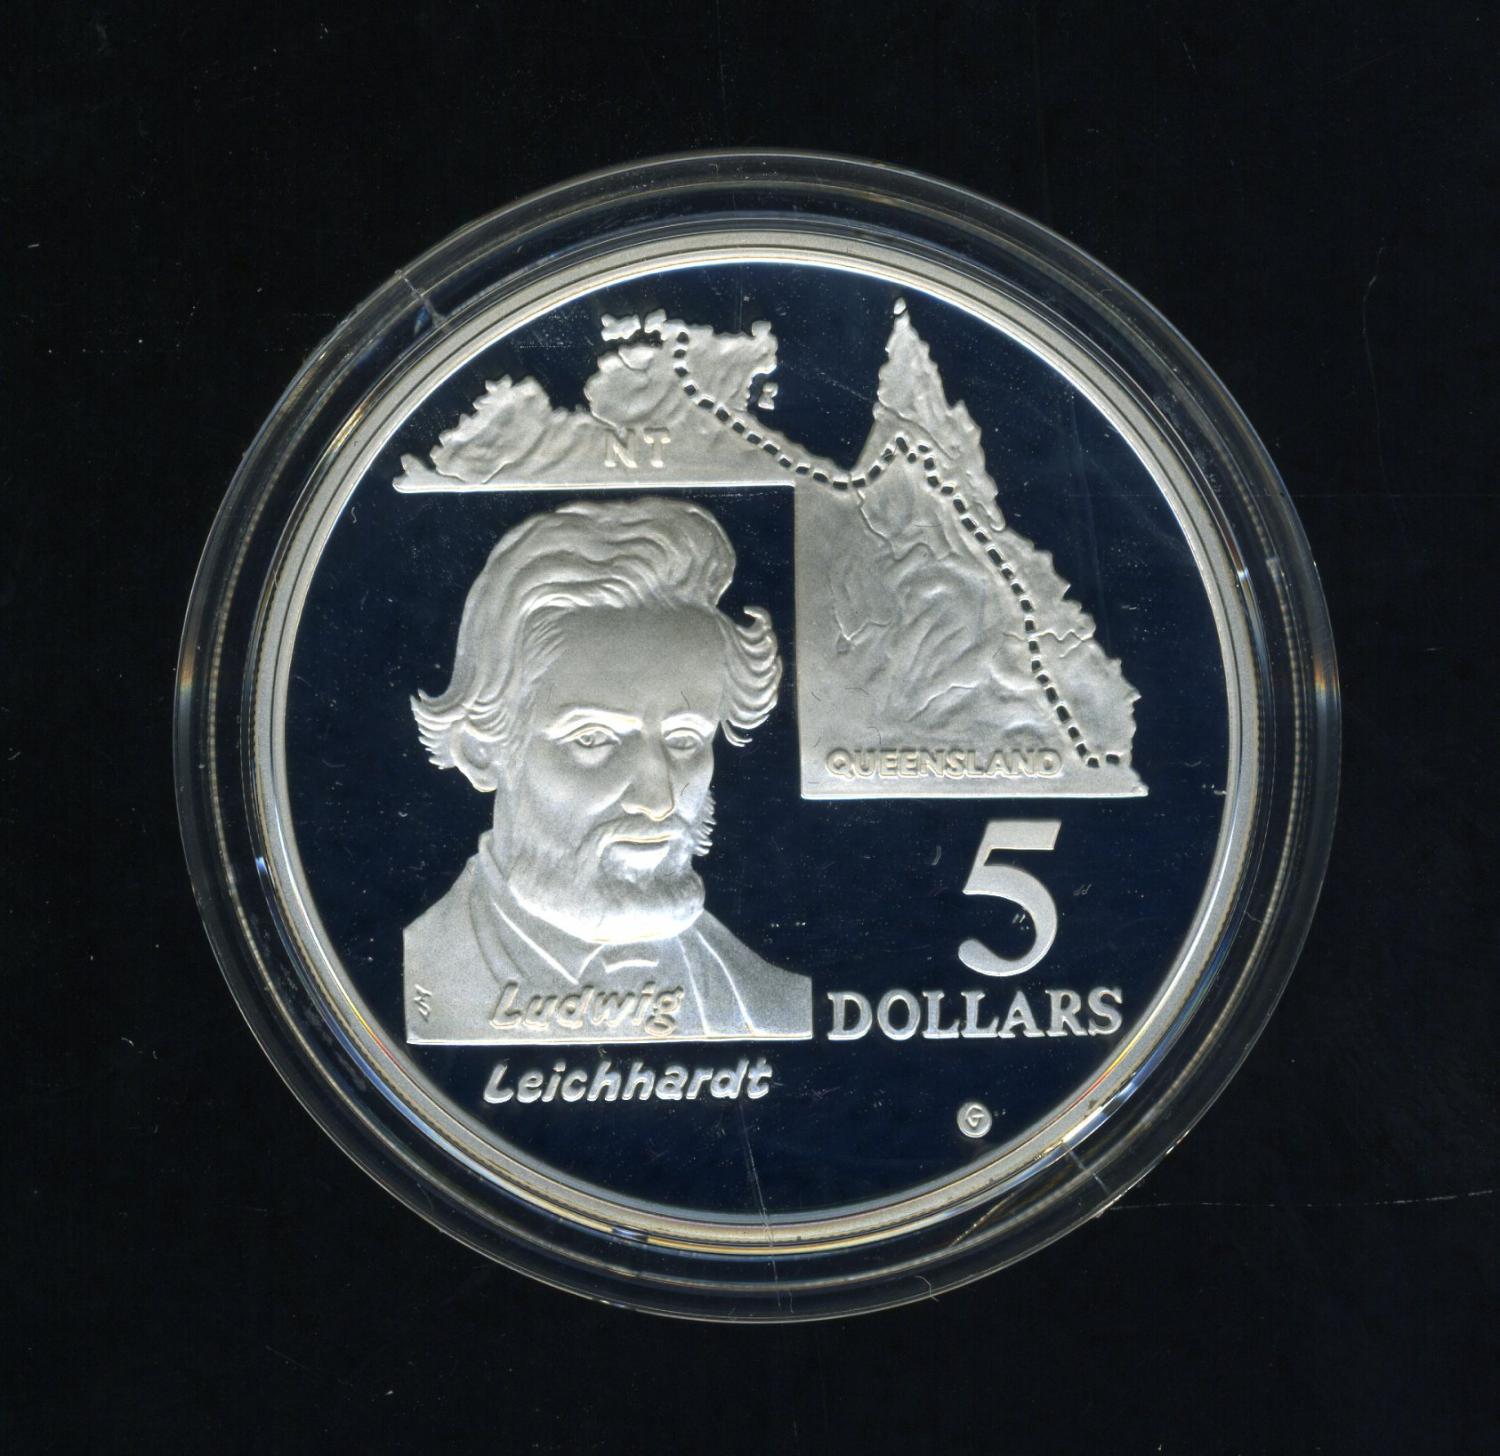 Thumbnail for 1994 Australian $5 Silver Coin From Masterpieces in Silver Set - Leichhardt.  The Coin is Sterling Silver and contains over 1oz of Pure Silver.